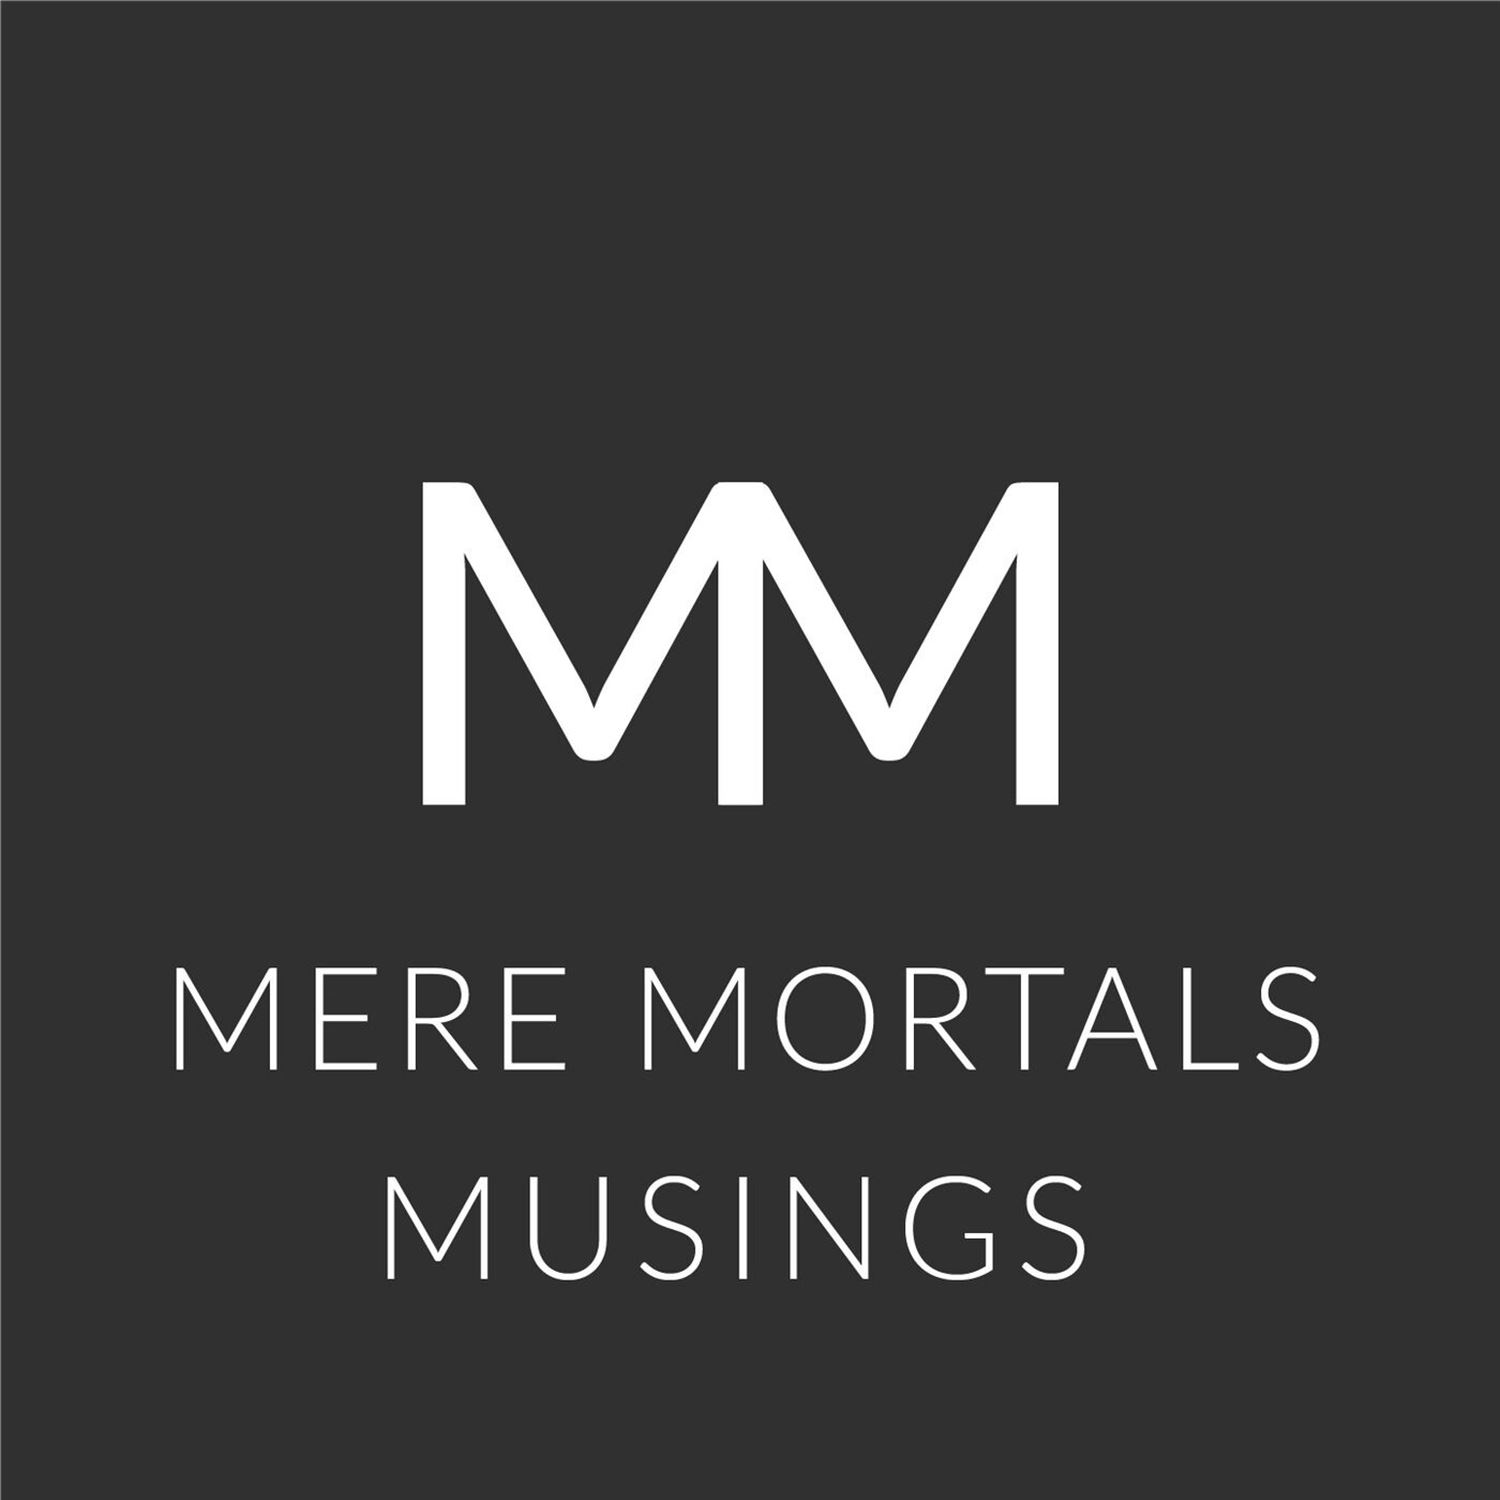 Who Listens To The News? (Mere Mortals Episode #81 - Musings)